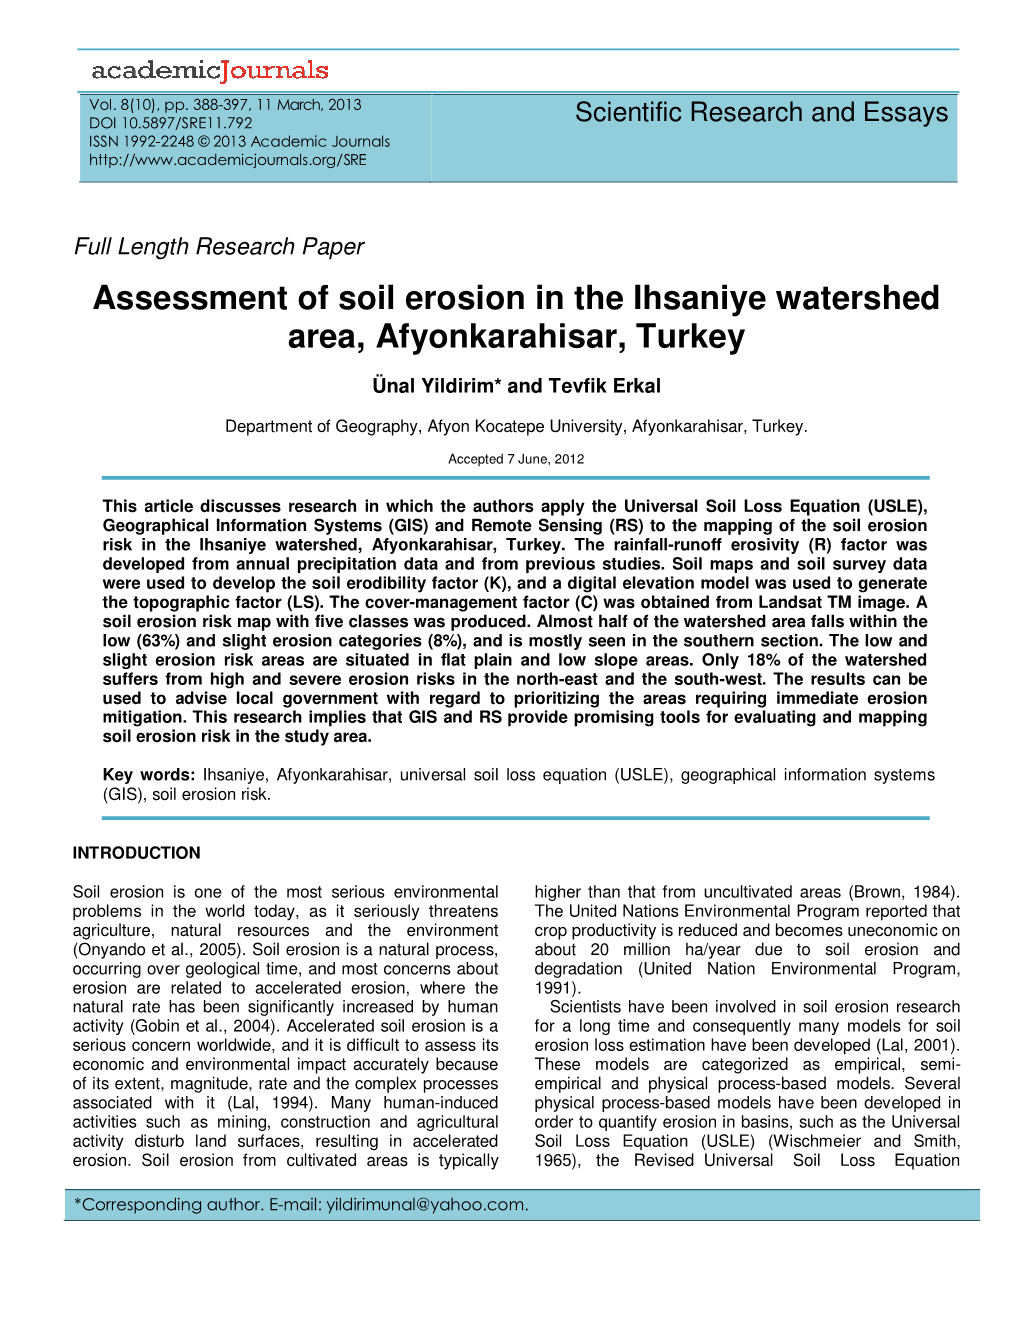 Assessment of Soil Erosion in the Ihsaniye Watershed Area, Afyonkarahisar, Turkey